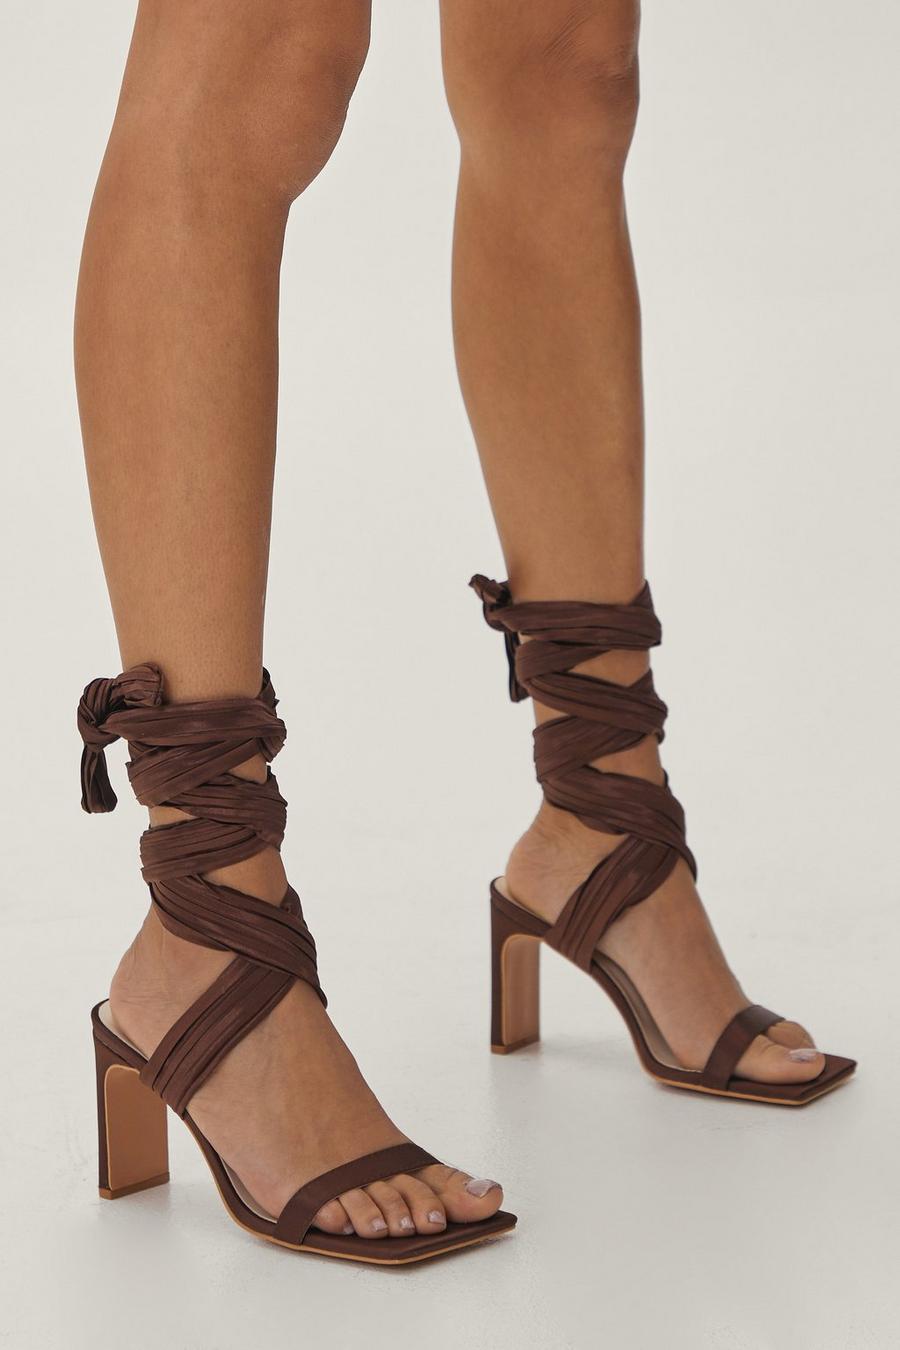 Satin Ankle Wrap Square Toe Heels